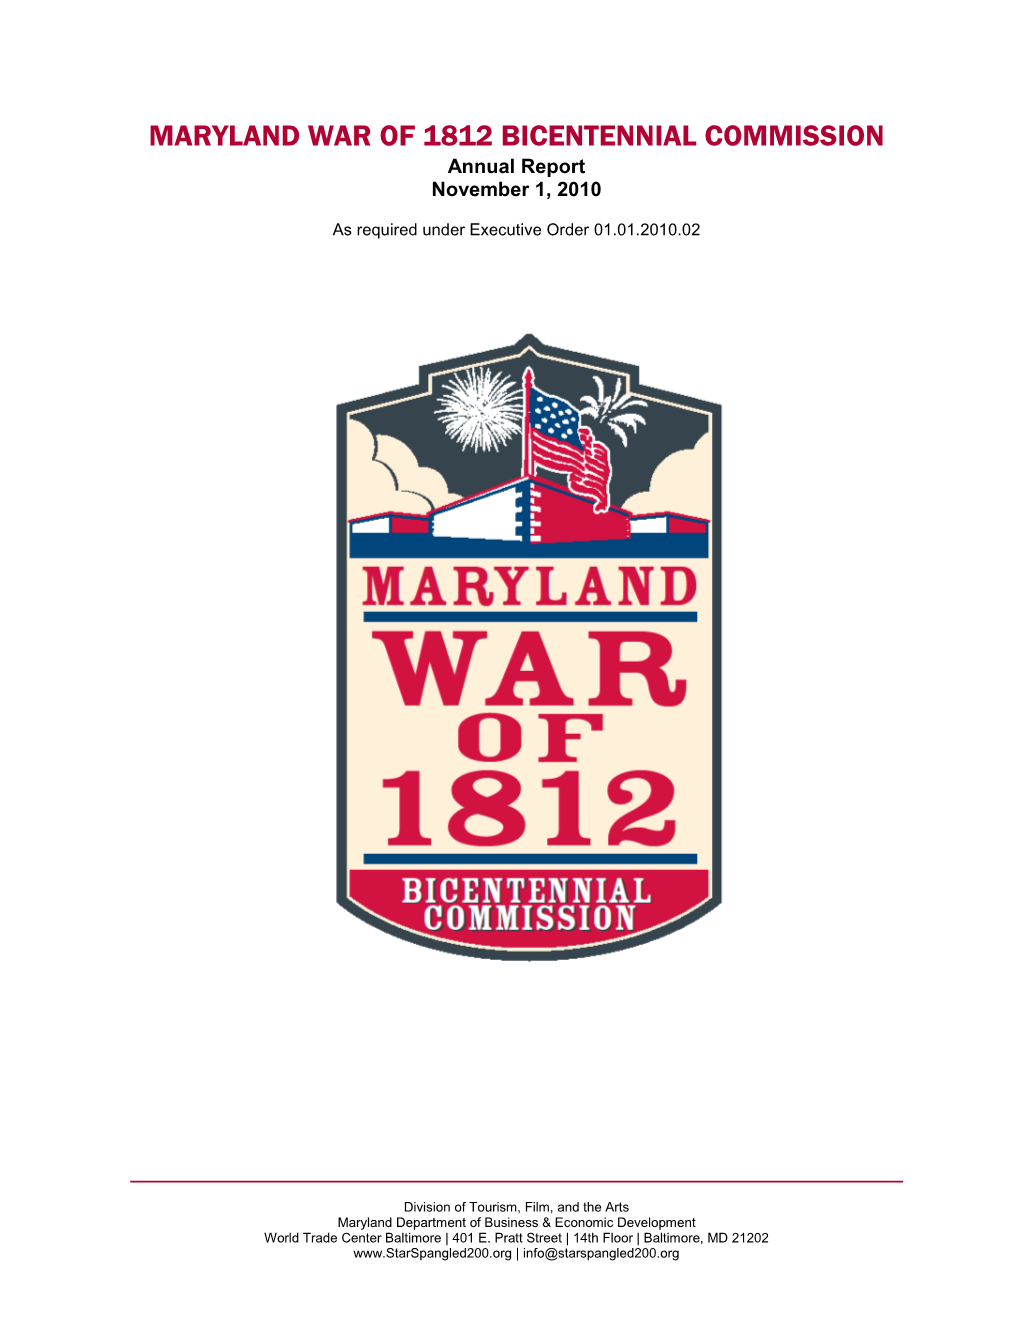 MARYLAND WAR of 1812 BICENTENNIAL COMMISSION Annual Report November 1, 2010